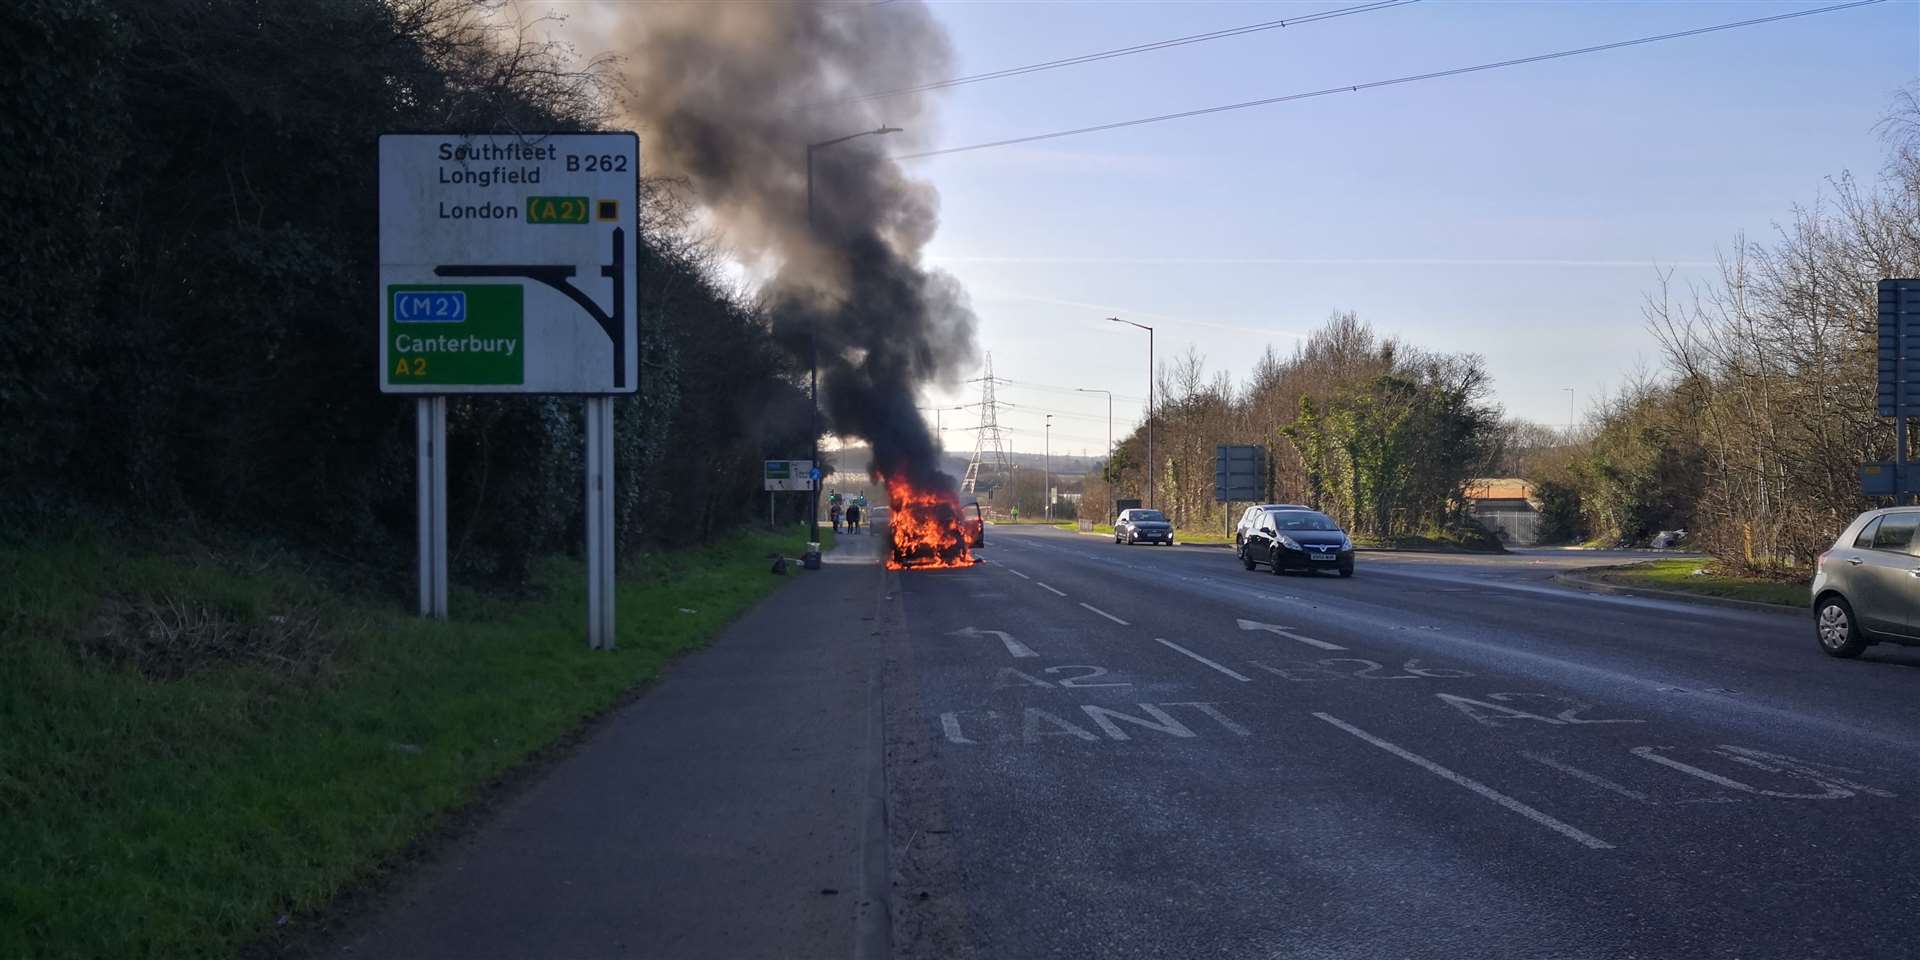 The car fire started near the Sainsbury roundabout and the A2.